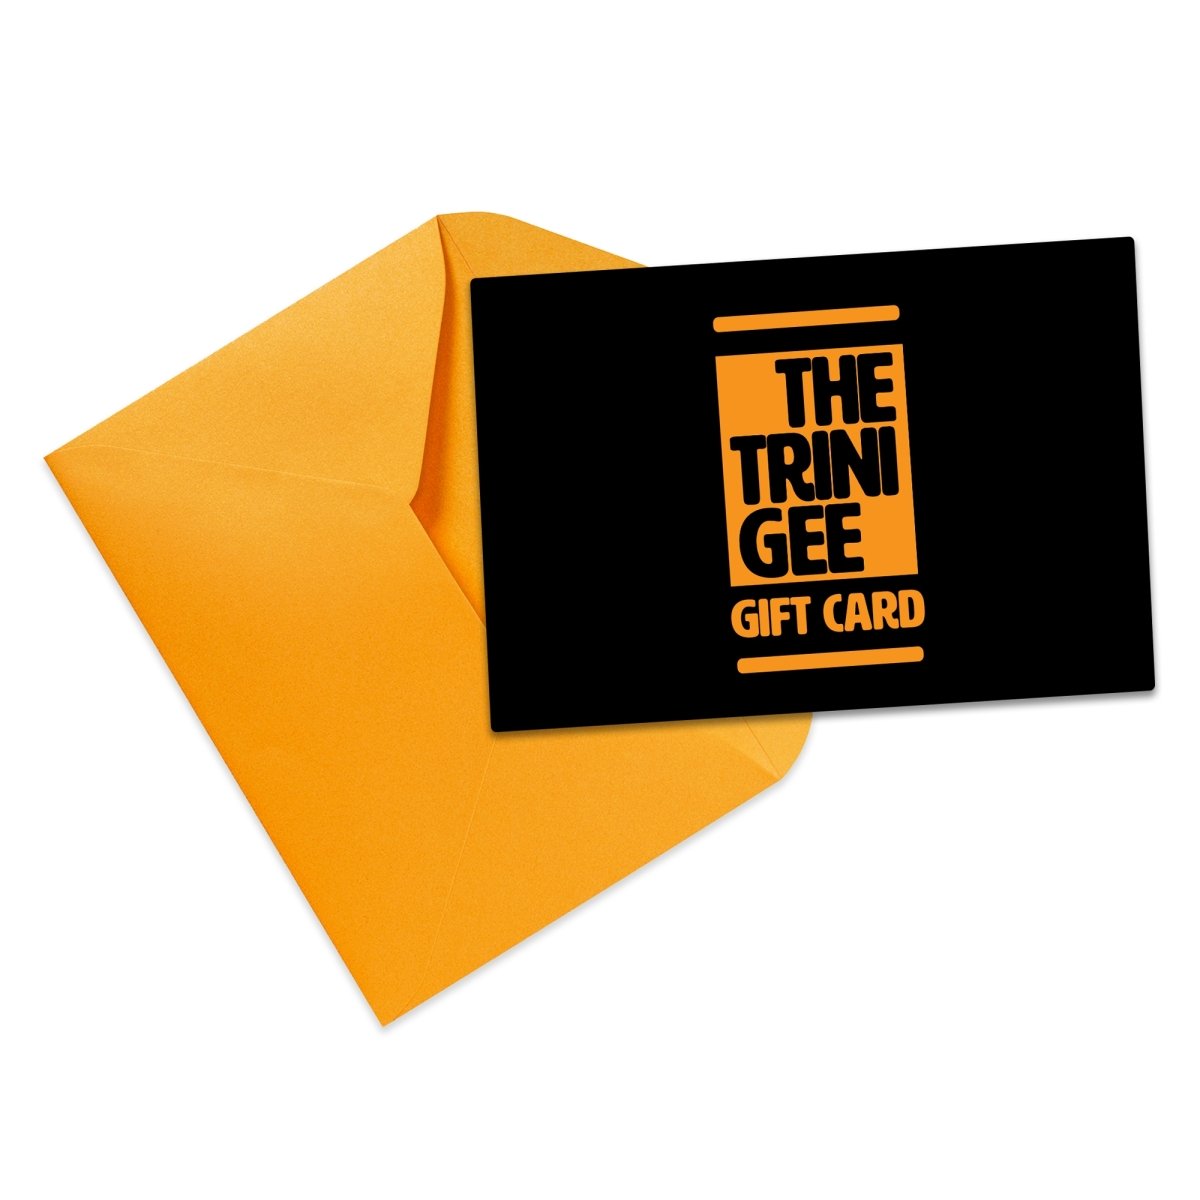 Gift Cards - The Trini Gee